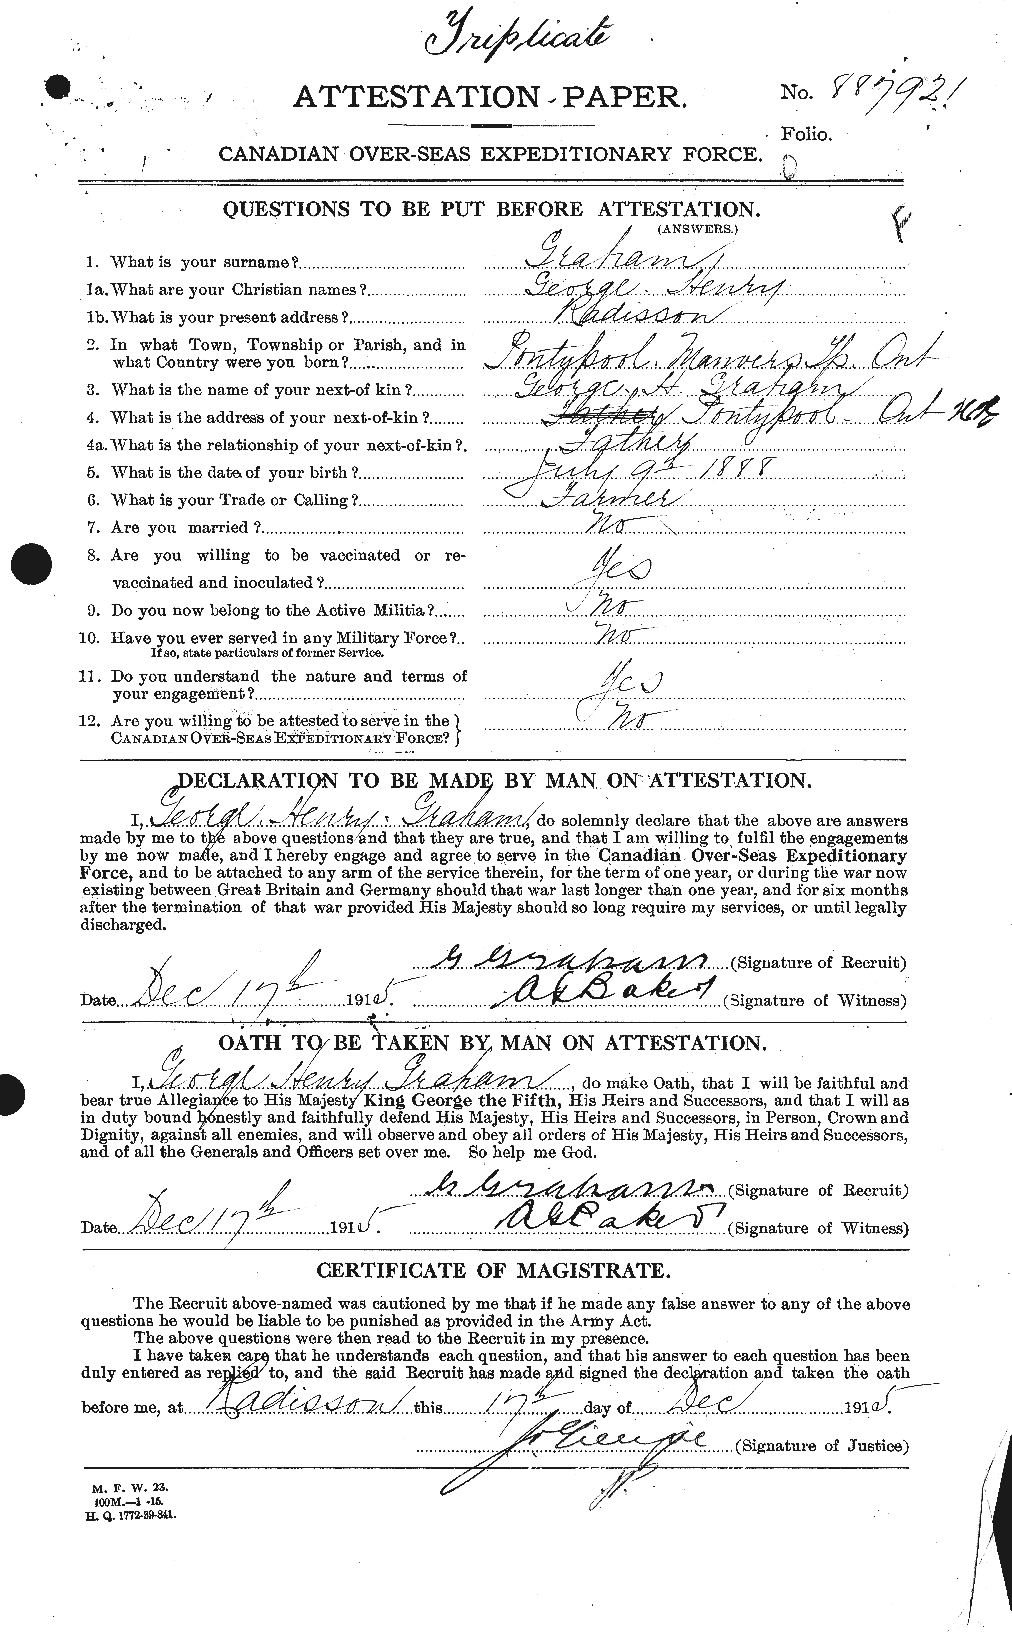 Personnel Records of the First World War - CEF 357662a